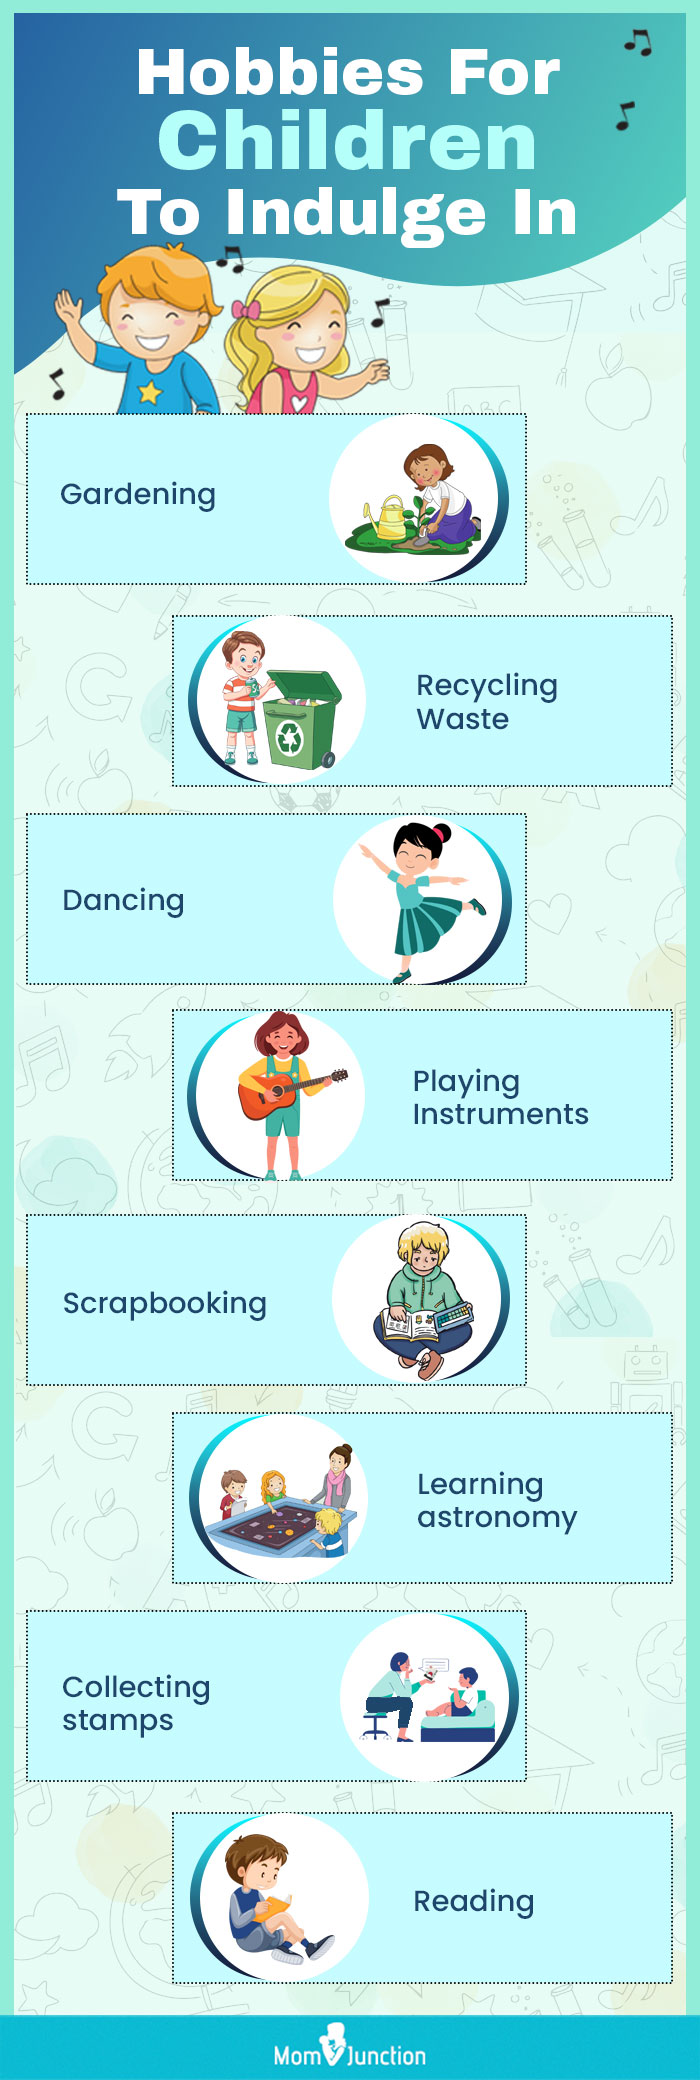 hobbies for children to indulge in [infographic]